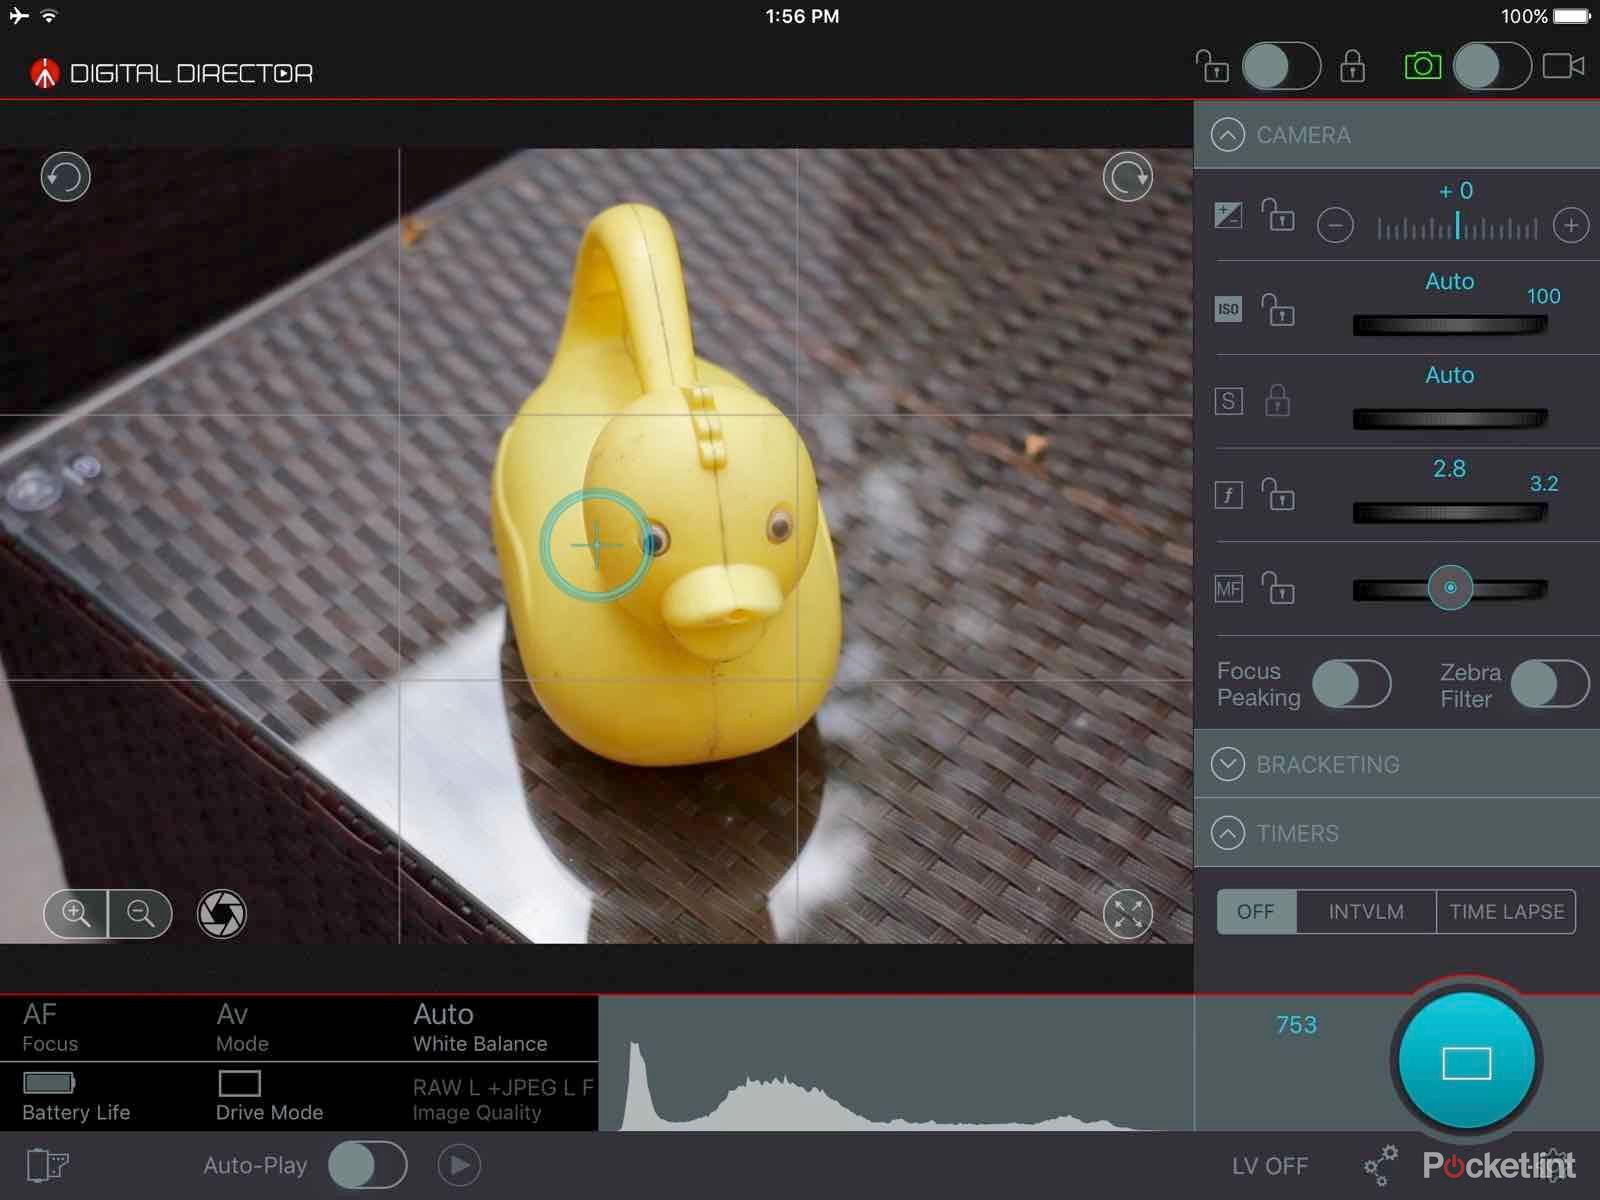 manfrotto digital director for ipad air 2 review image 8